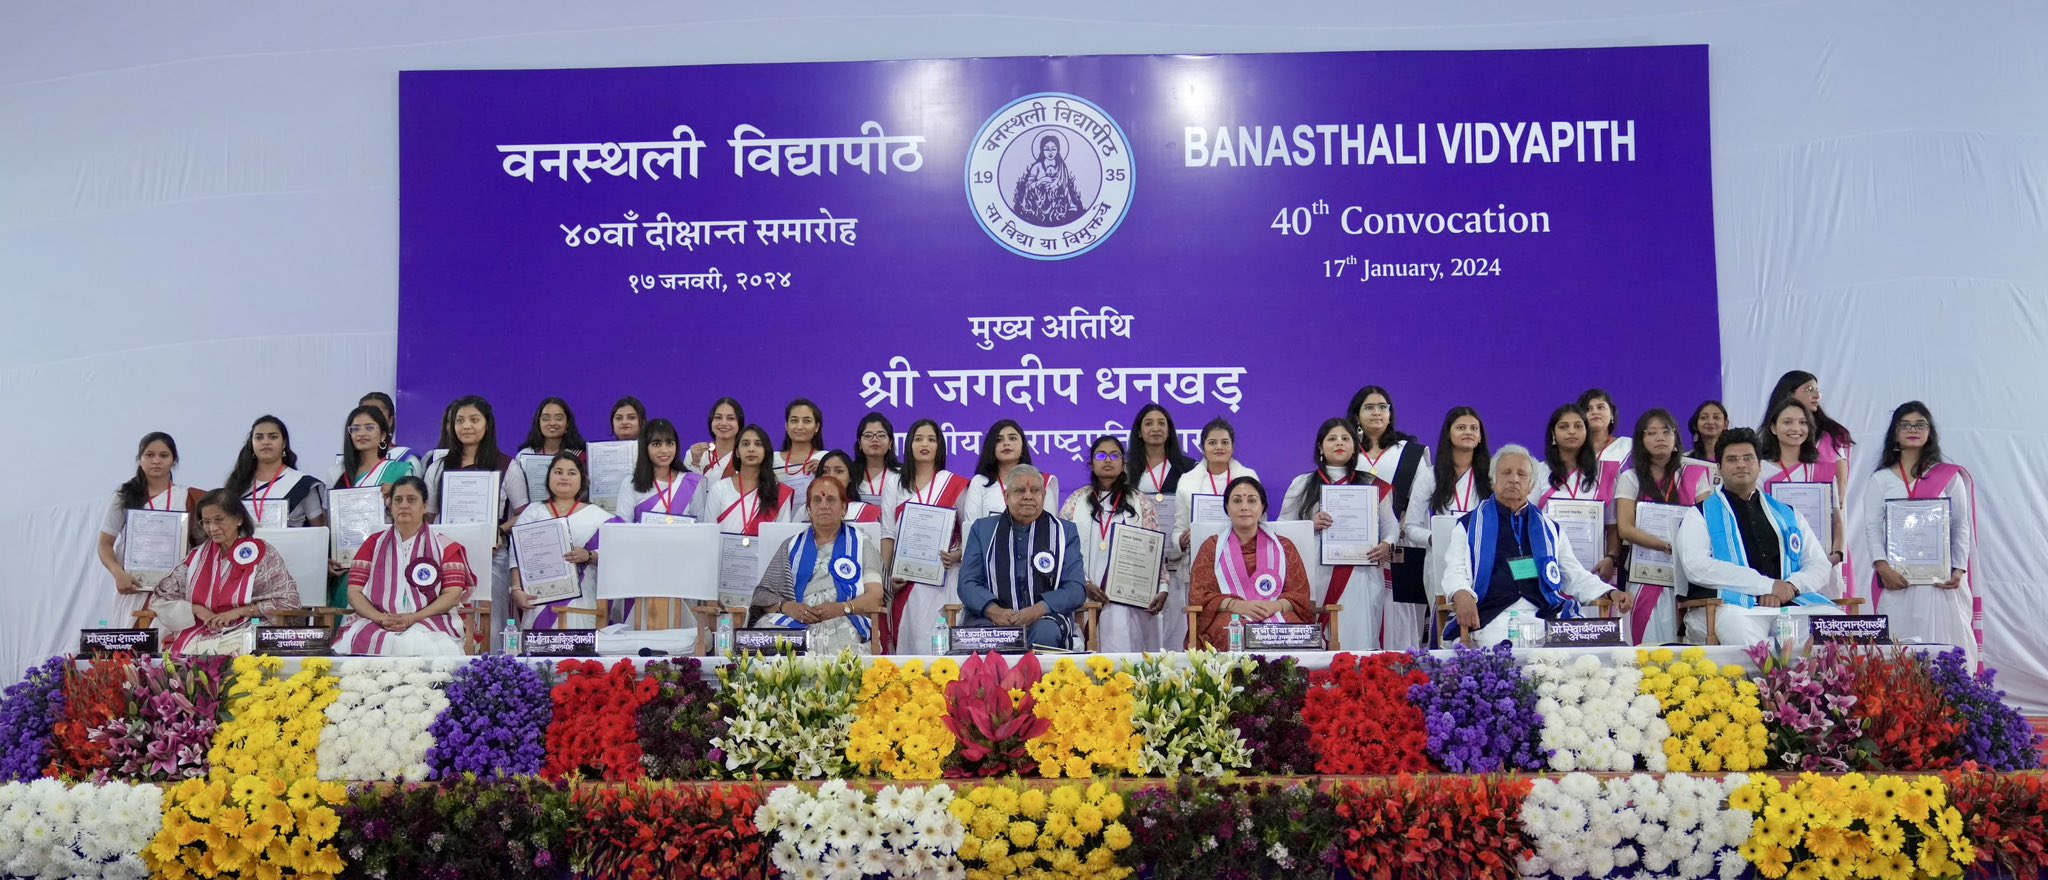 The Vice-President, Shri Jagdeep Dhankhar presiding over the conferment of PhD, undergraduate & postgraduate degrees, and the awarding of gold medals, to students of Banasthali Vidyapith at Tonk, Rajasthan on January 17, 2024.